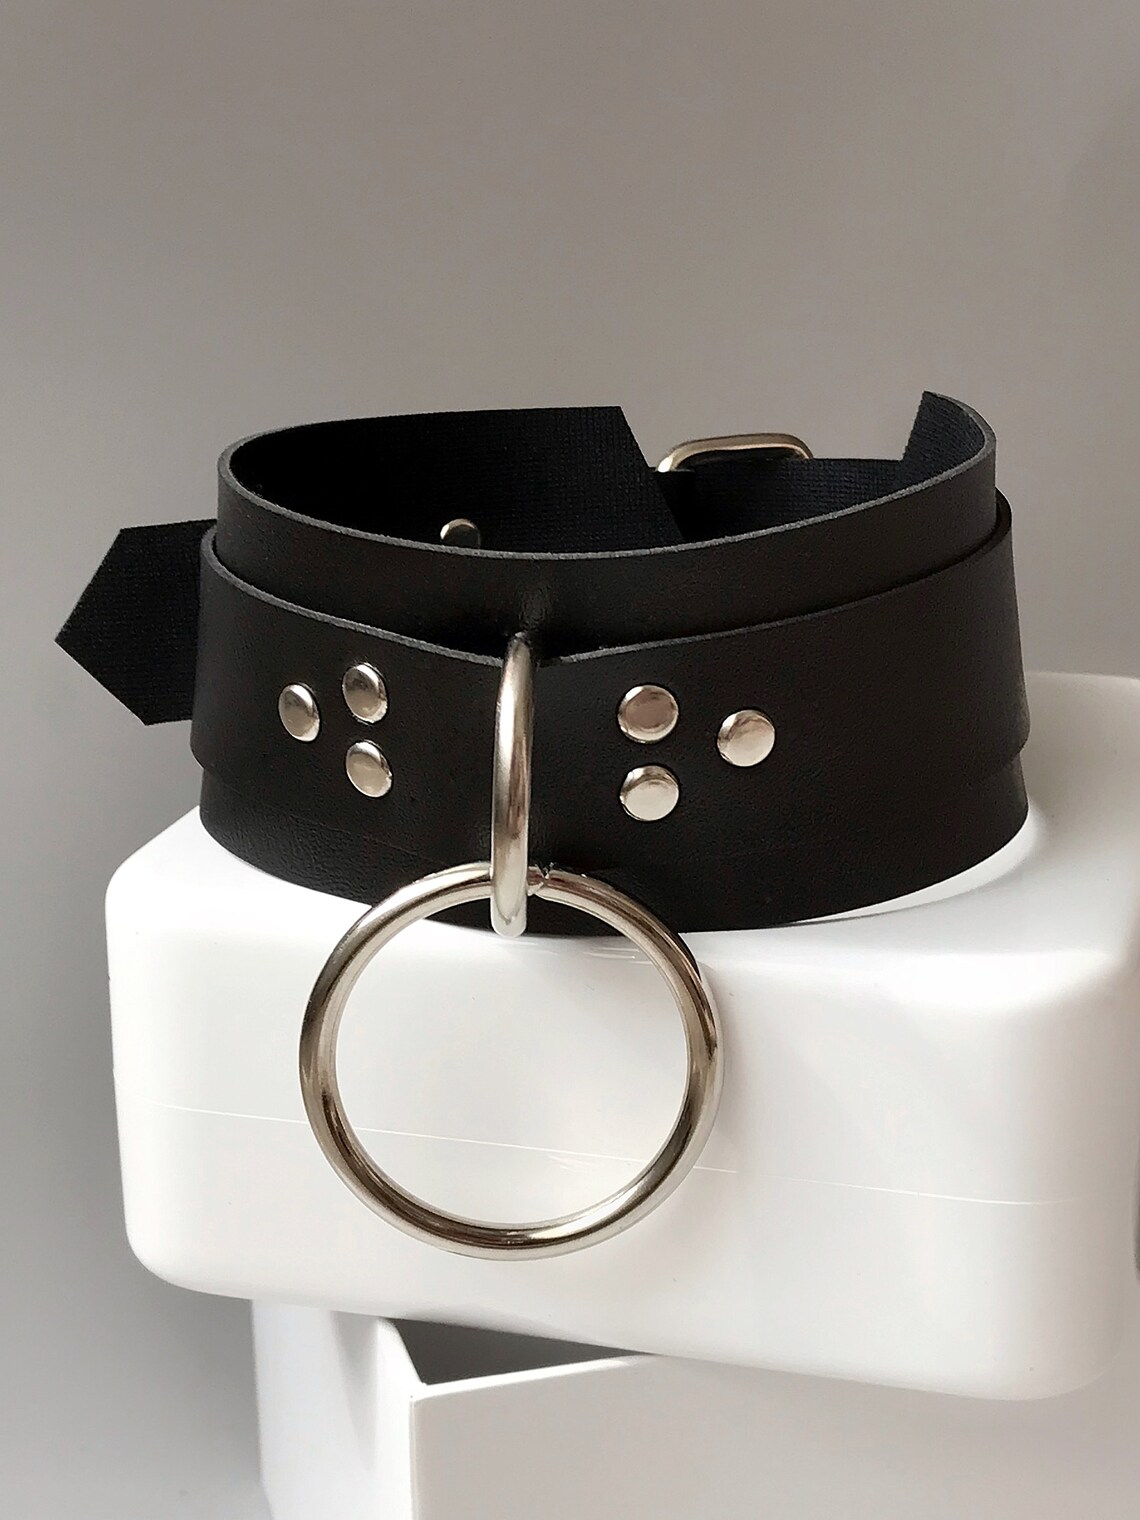 Brutal Choker With O-ring BDSM Leather Choker Collar With - Etsy